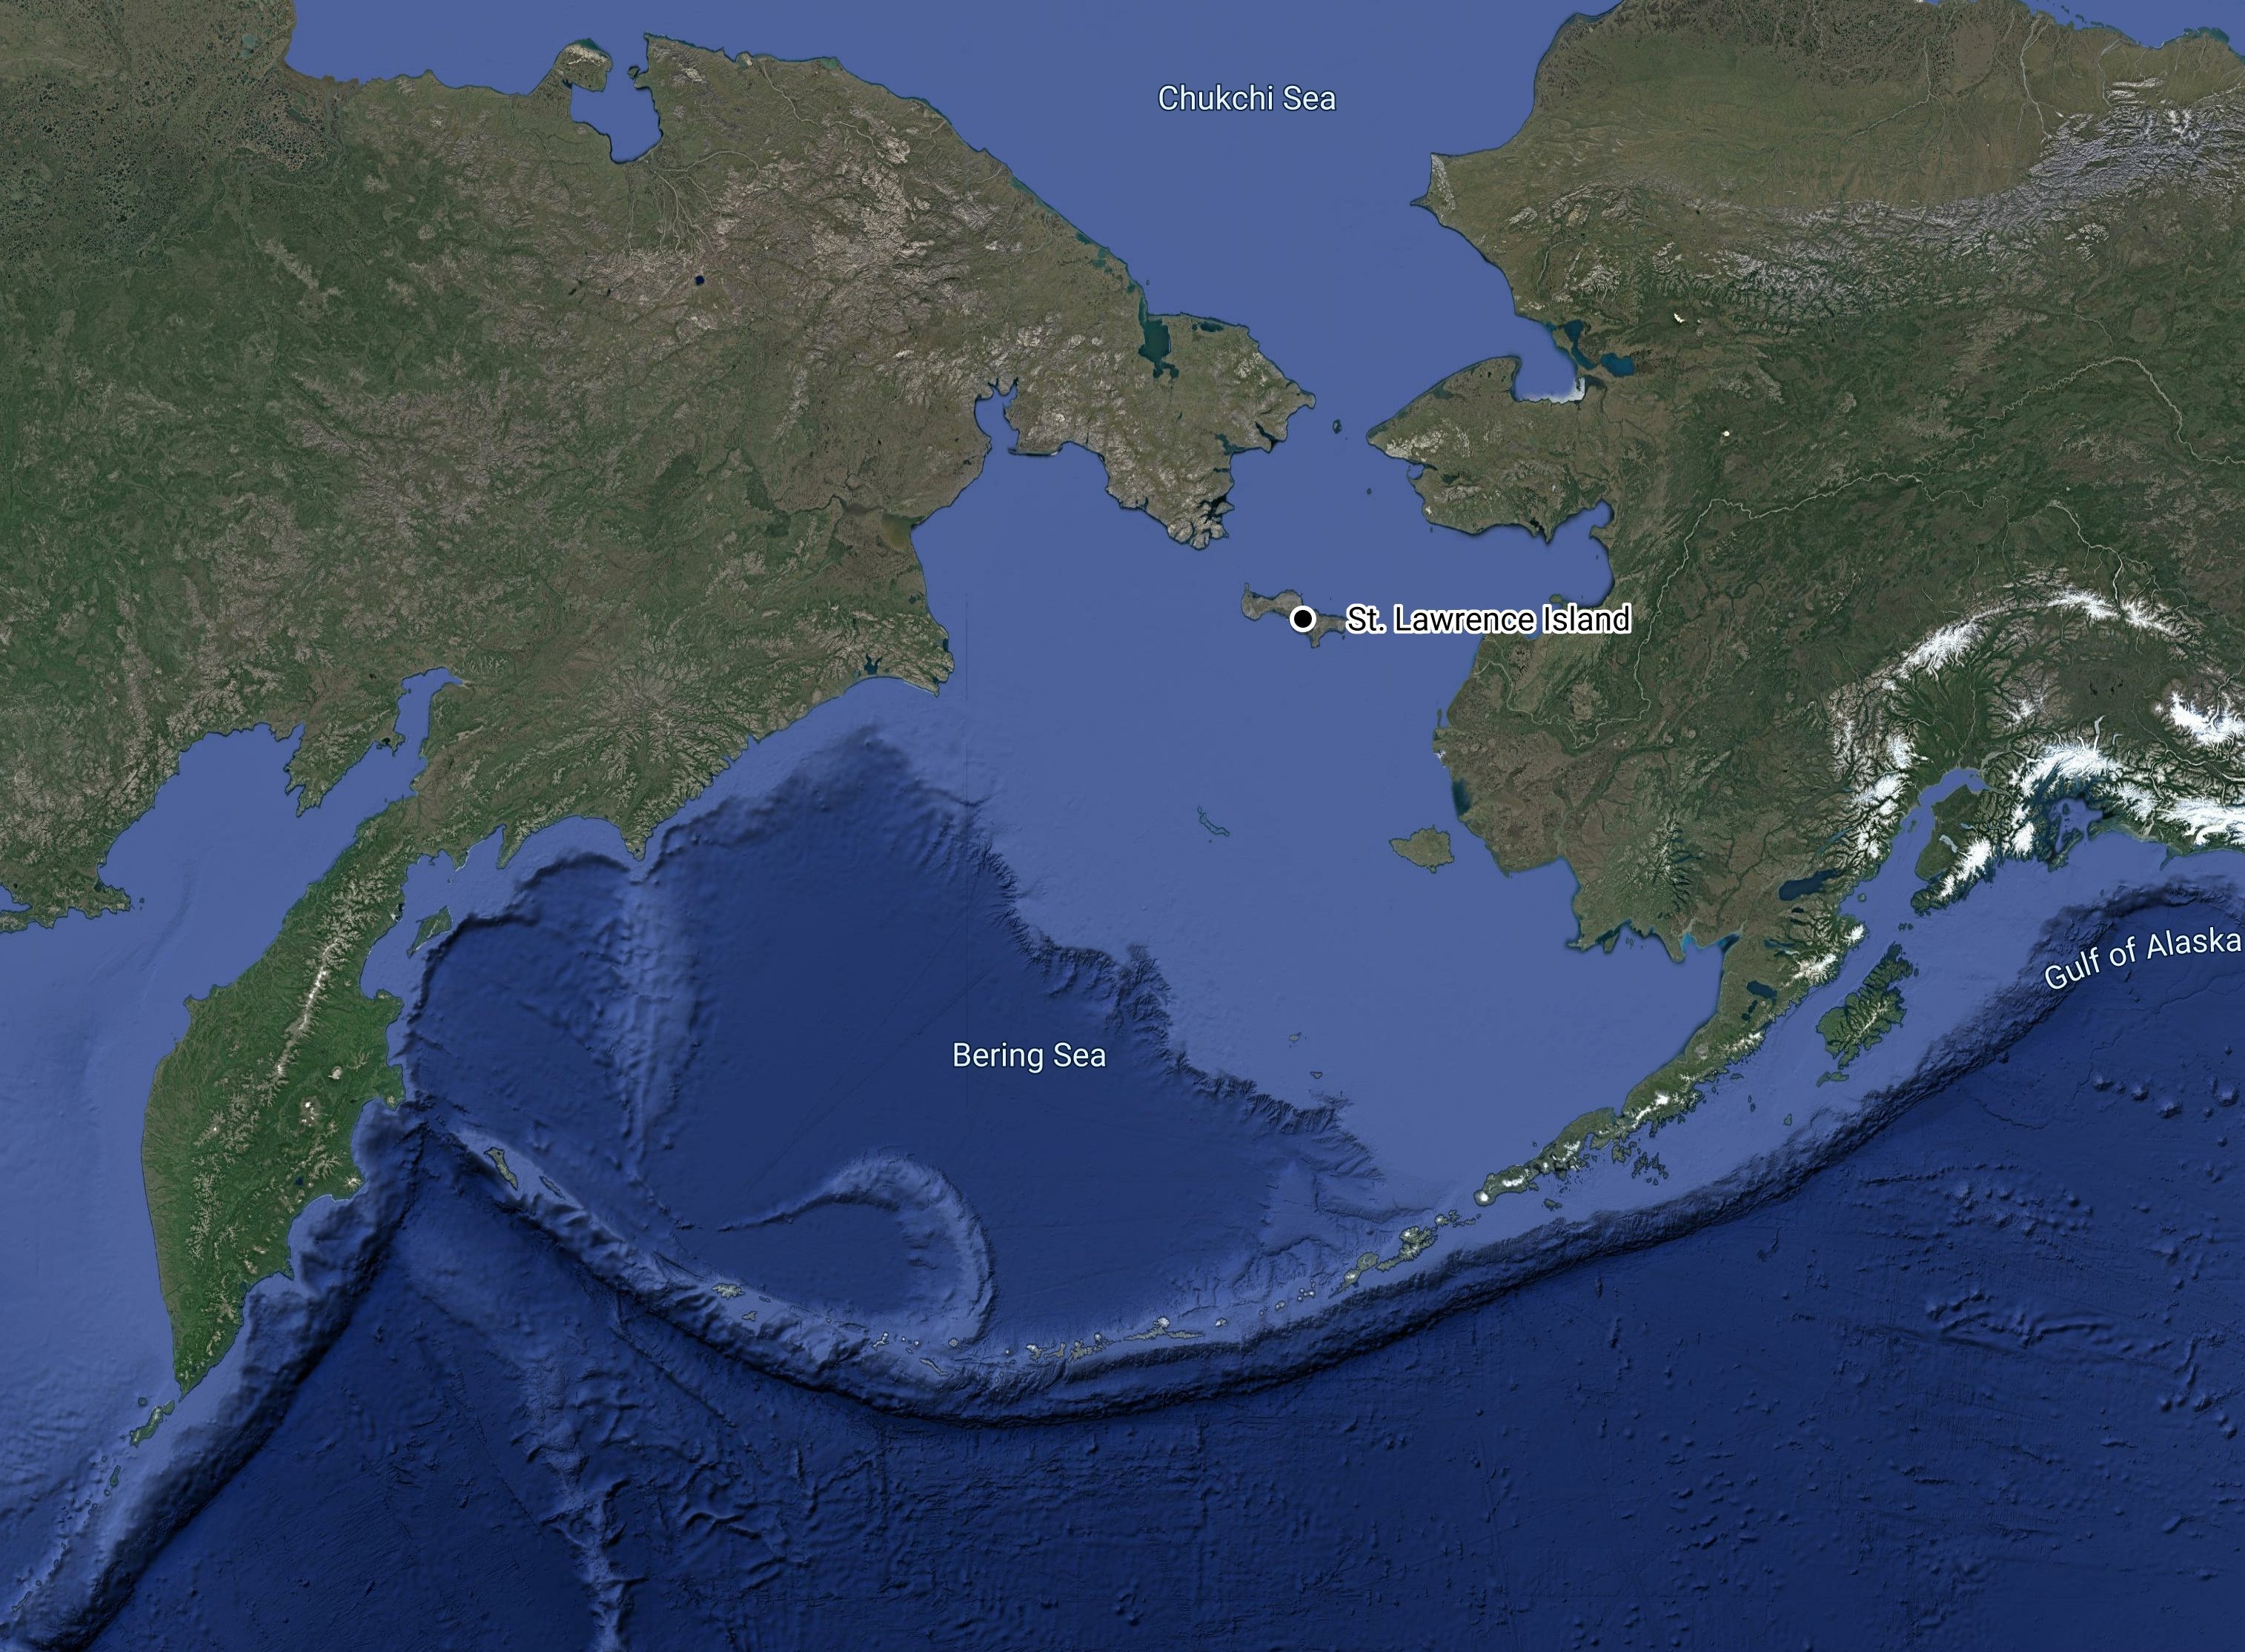 A map showing St. Lawrence Island, between the Russian far east and Alaska in the Bering Sea